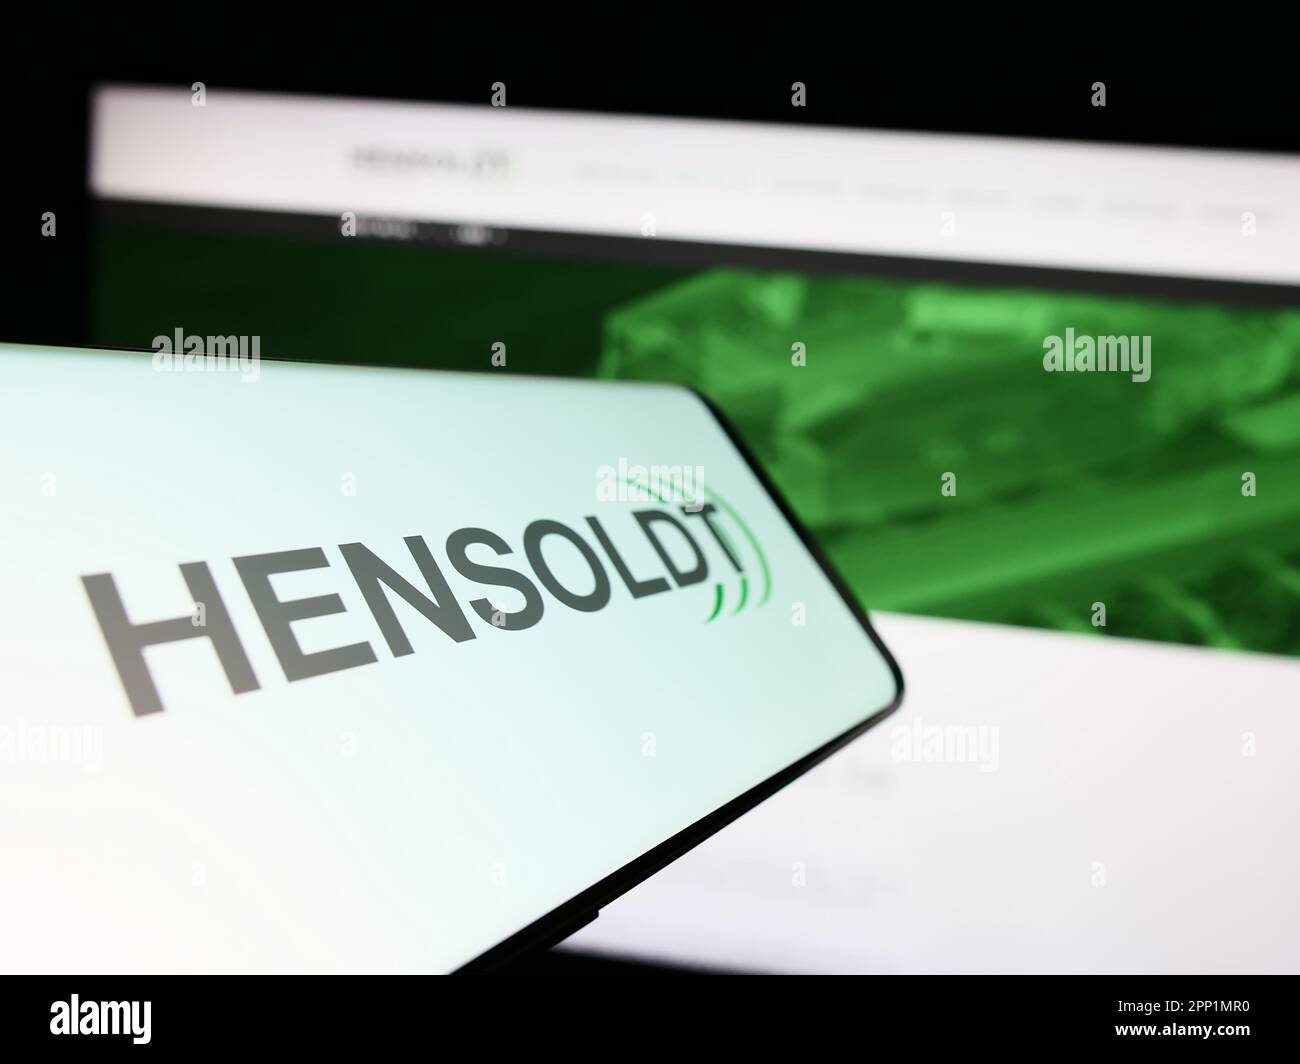 Smartphone with logo of German defense company Hensoldt AG on screen in front of business website. Focus on center of phone display. Stock Photo